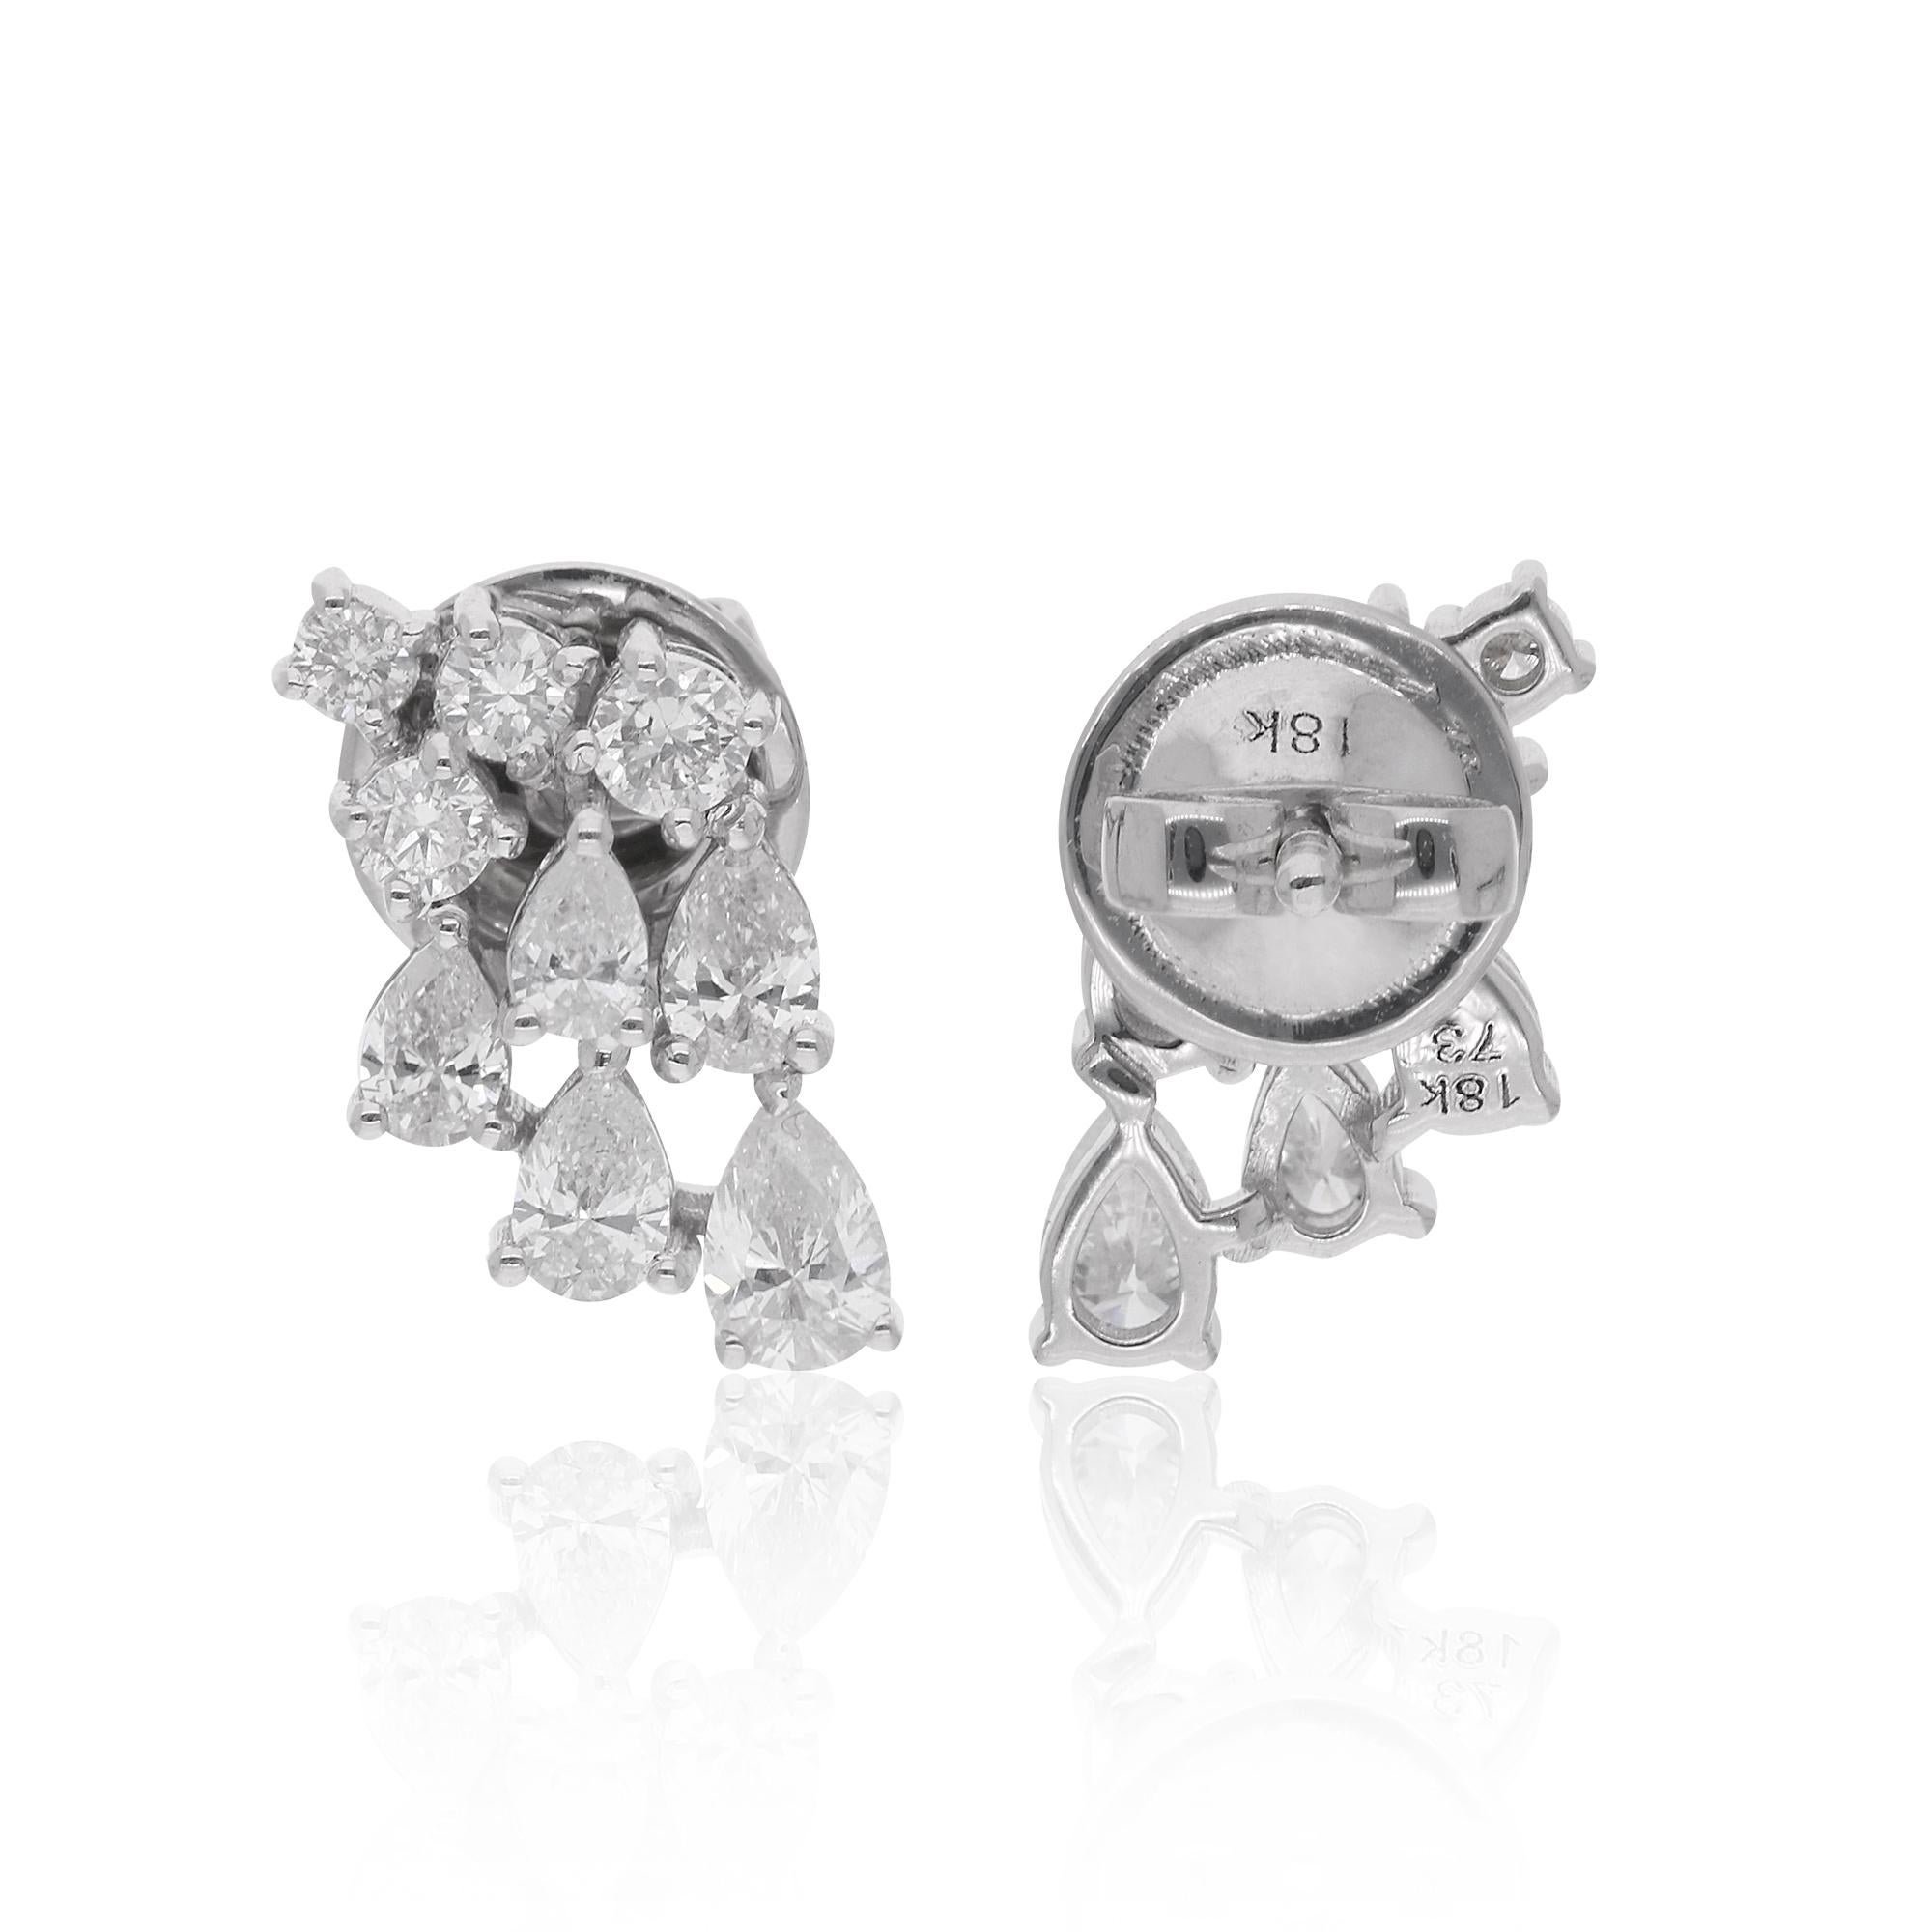 At the center of each earring gleams a brilliant pear-shaped diamond, flanked by delicate round-cut diamonds. The pear cut, with its graceful teardrop silhouette, adds a touch of timeless elegance, while the round-cut diamonds bring a classic